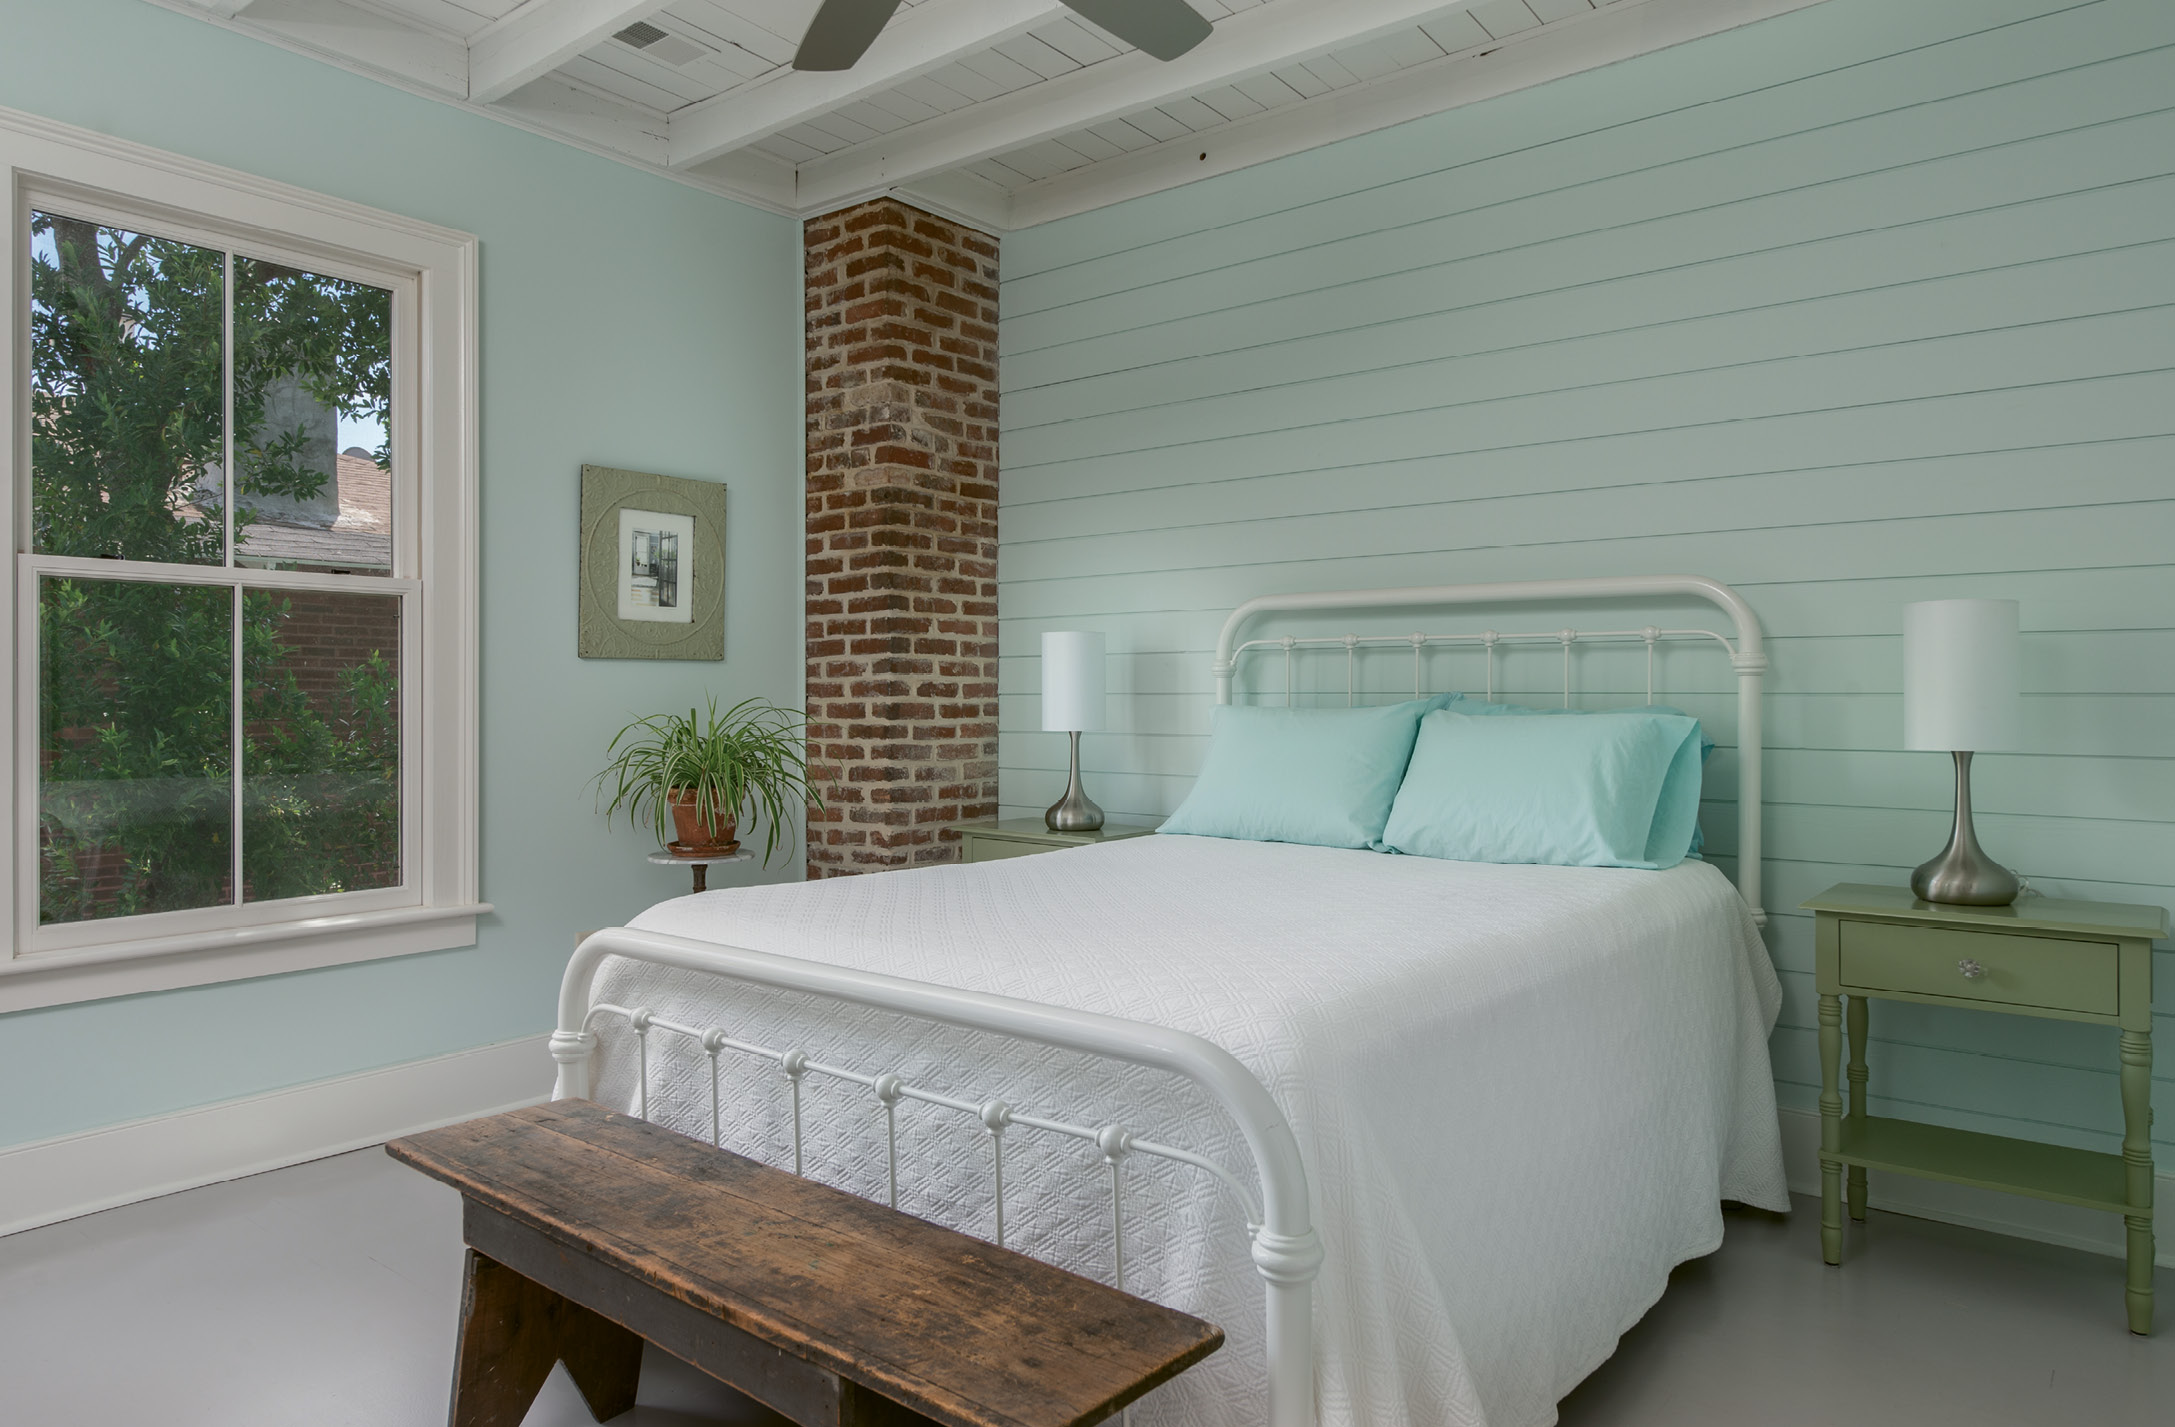 Shiplap walls in Behr’s “Whipped Mint” set a serene mood in the master bedroom.